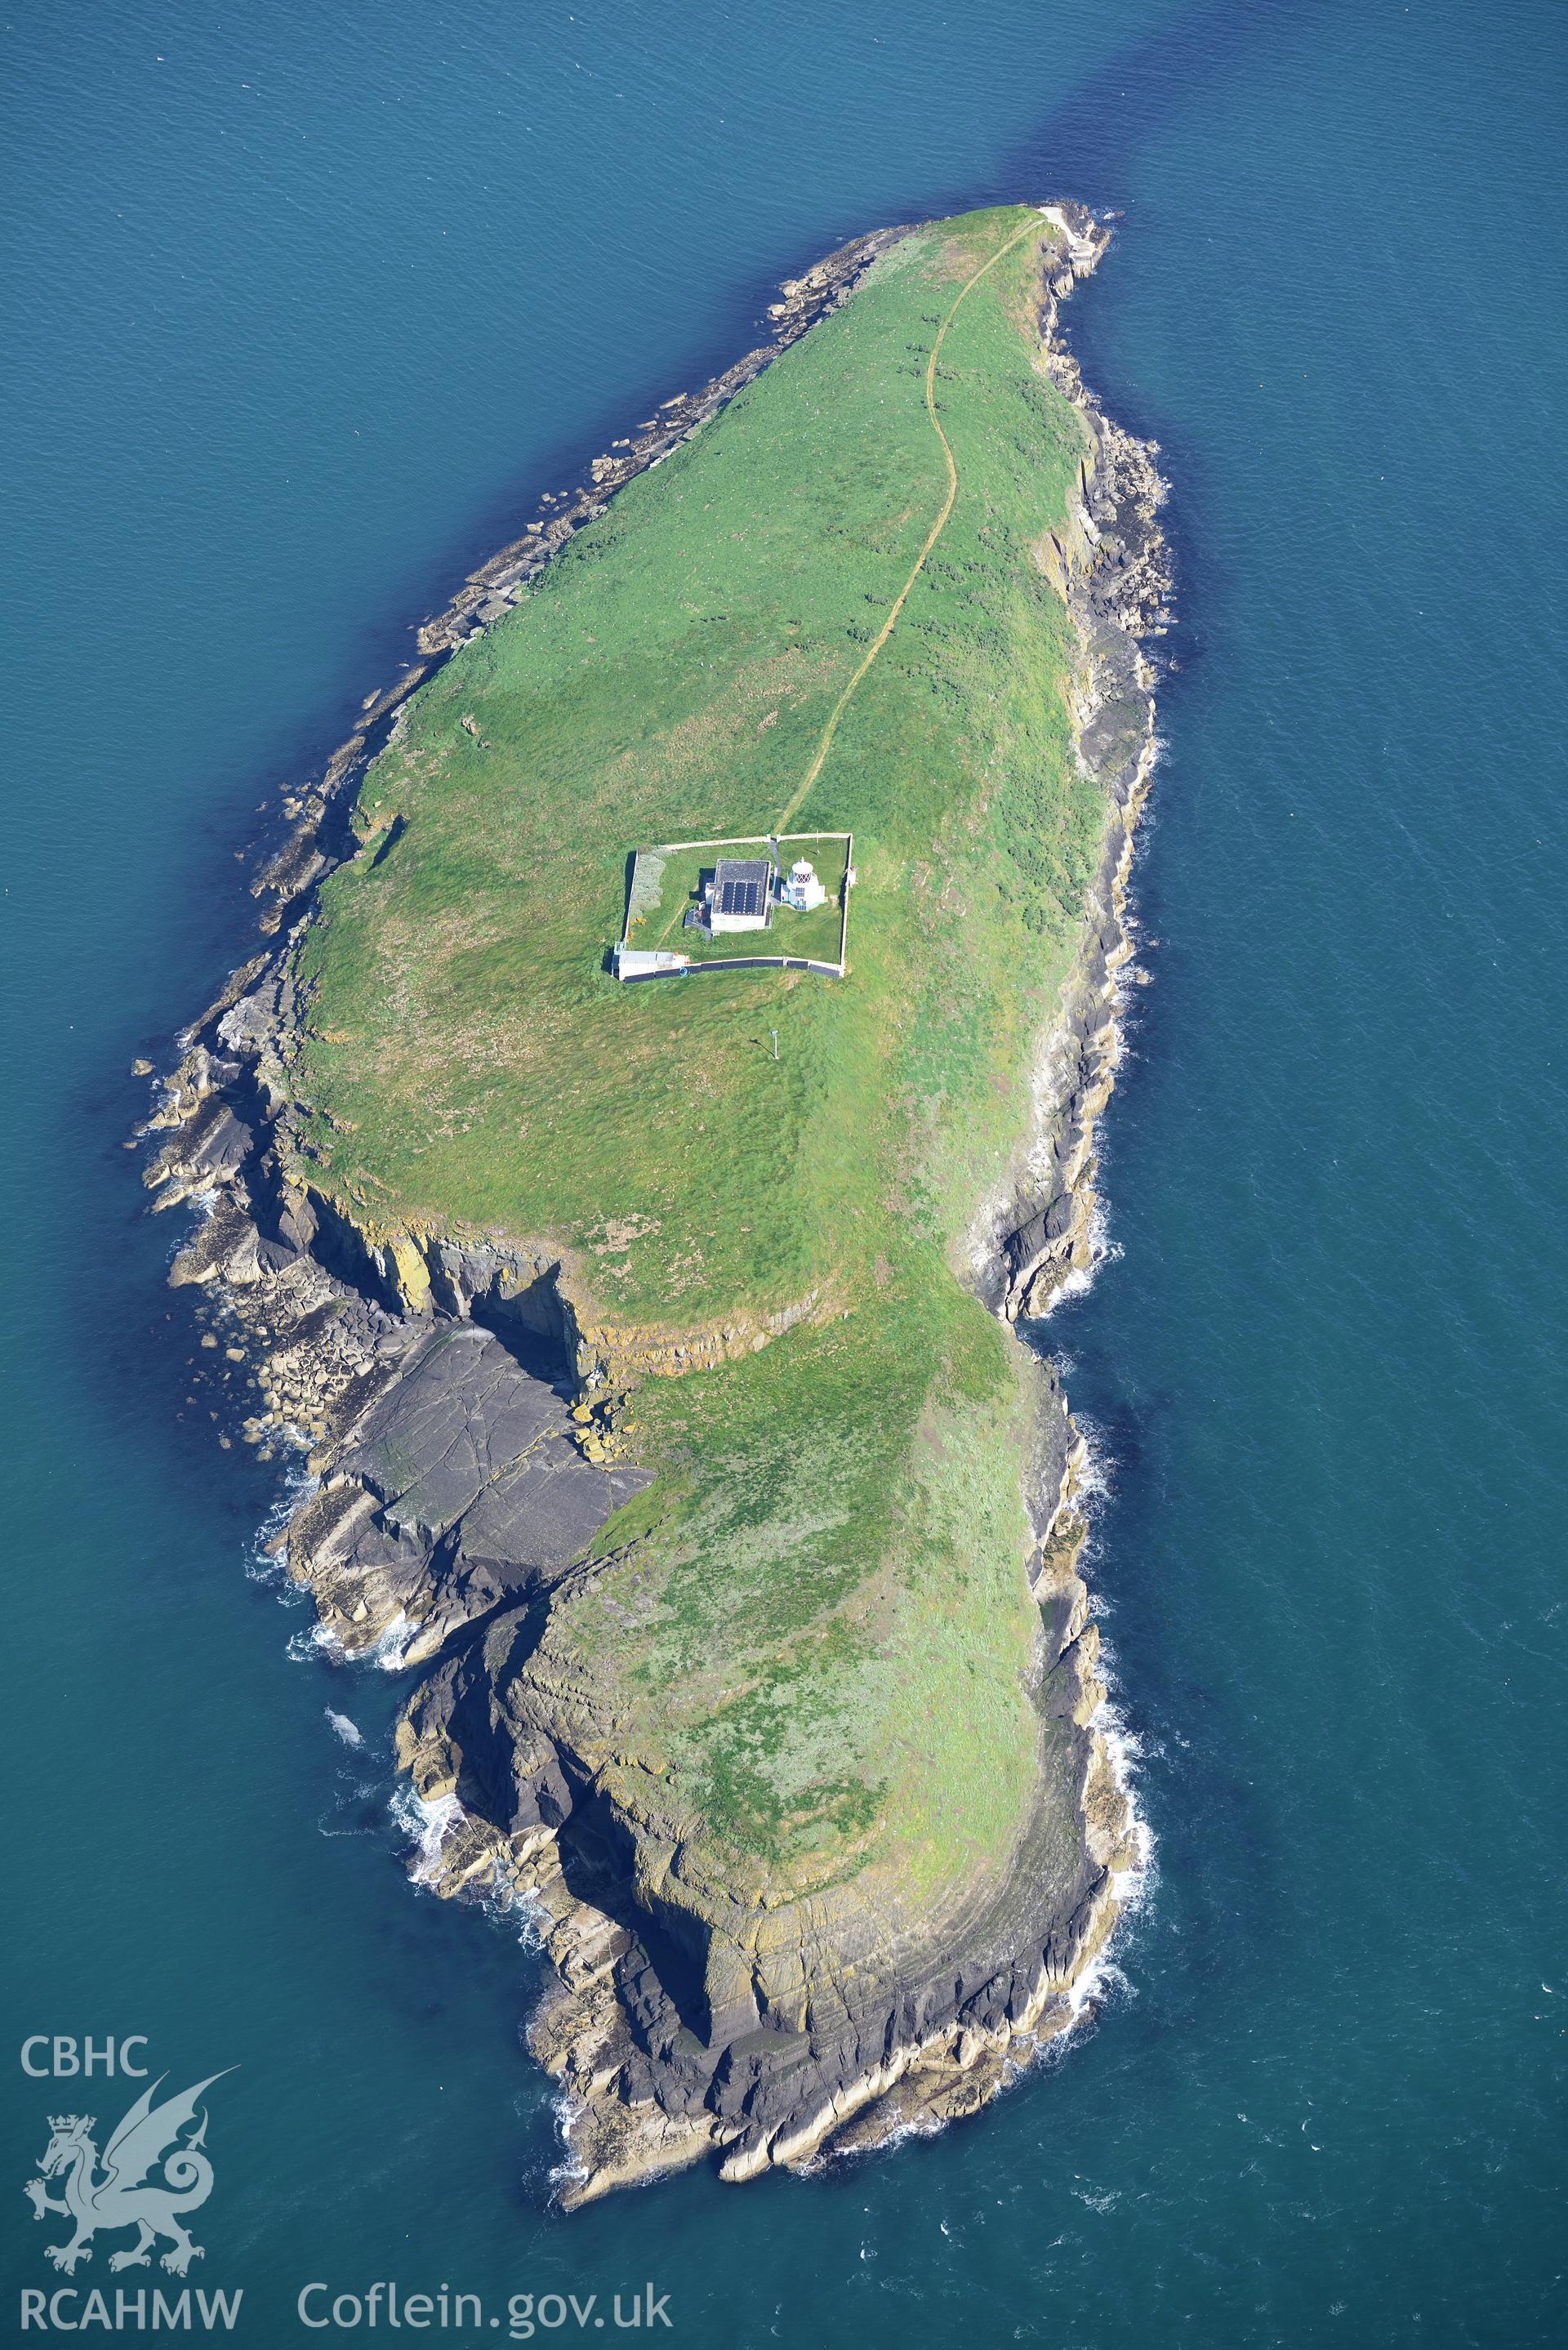 Aerial photography of St Tudwal's Island West taken on 3rd May 2017.  Baseline aerial reconnaissance survey for the CHERISH Project. ? Crown: CHERISH PROJECT 2017. Produced with EU funds through the Ireland Wales Co-operation Programme 2014-2020. All material made freely available through the Open Government Licence.